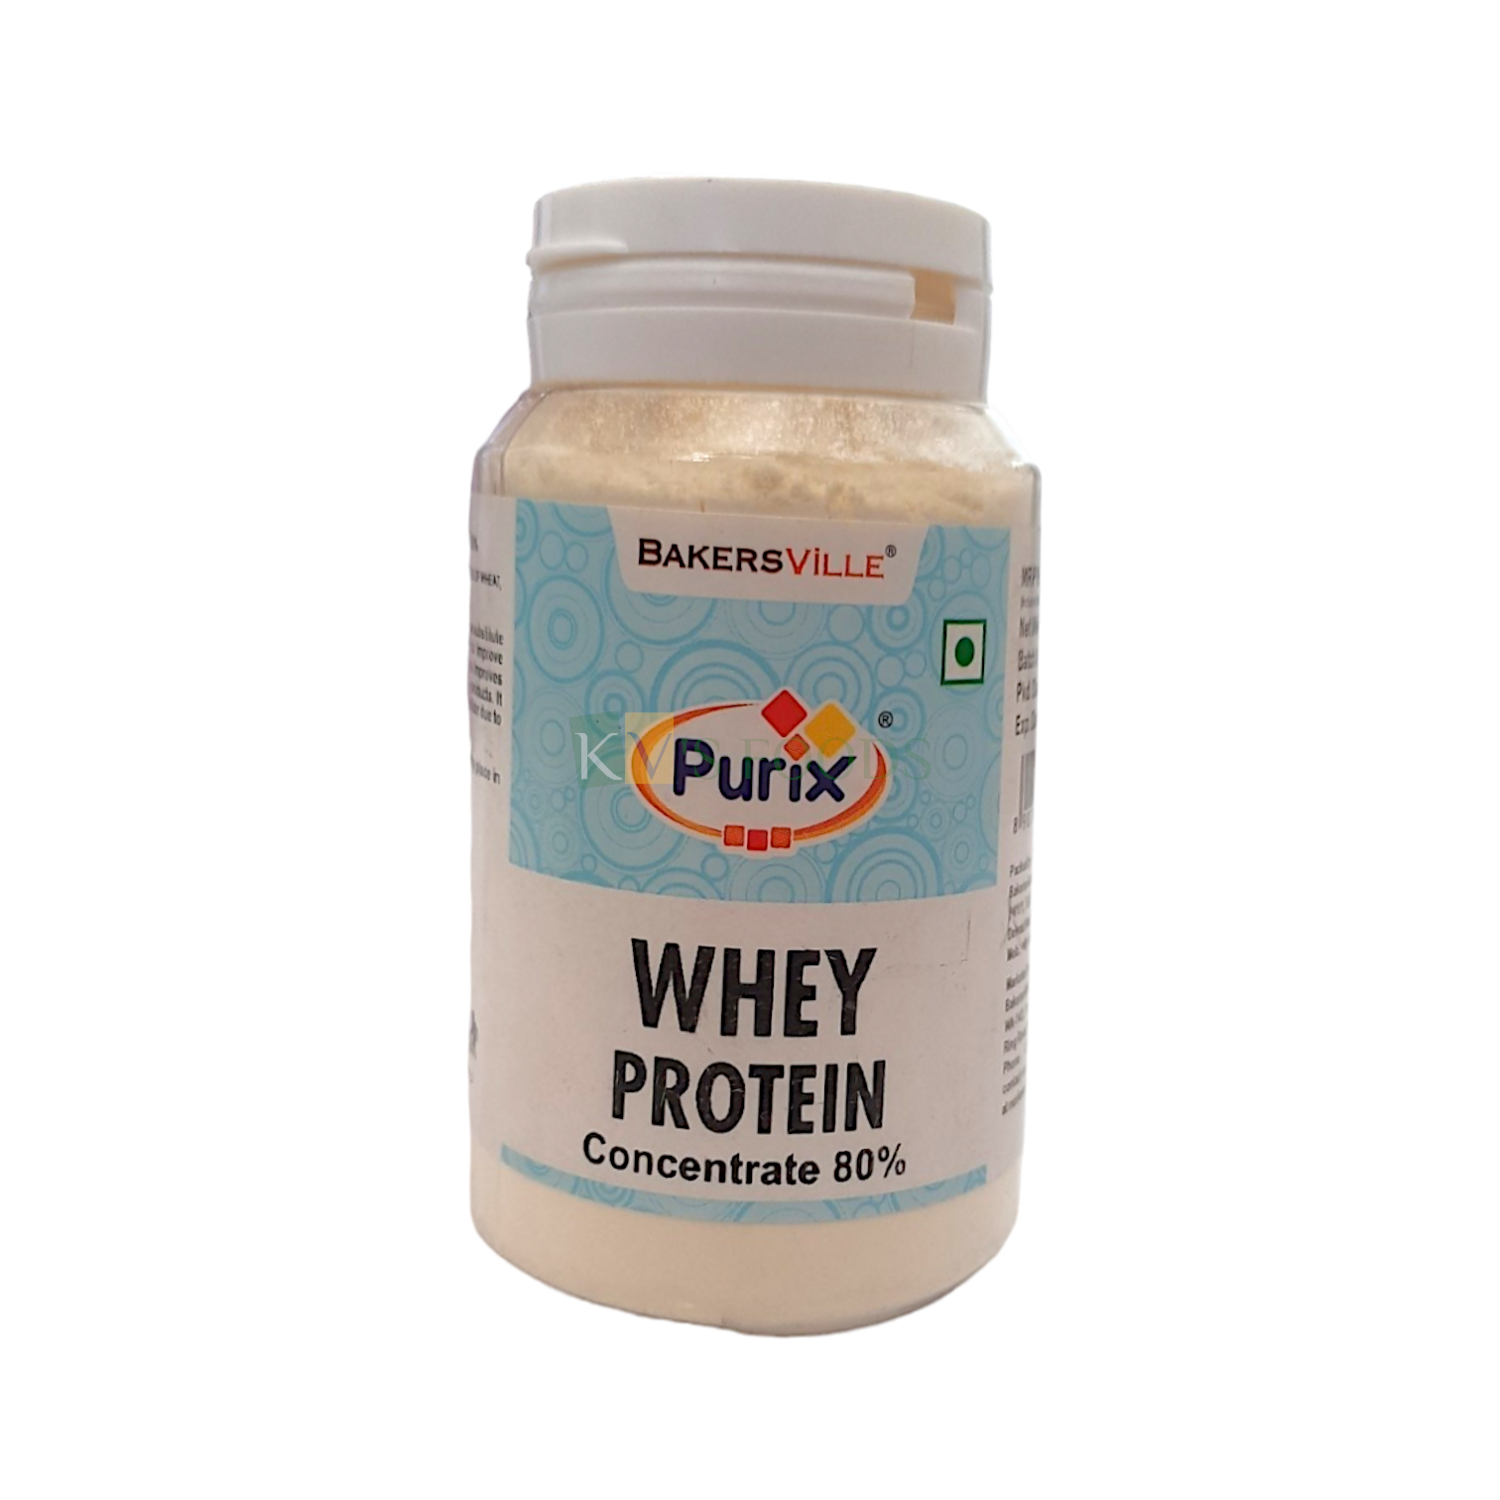 1 PC Purix Whey Protein (75 Gram), Vegetarian Cake Vegetarian Egg Substitute, Cake Improver, Protein Shake, Improve Bakery Product Quality Especially Cakes, Dairy Application as a stabilizer